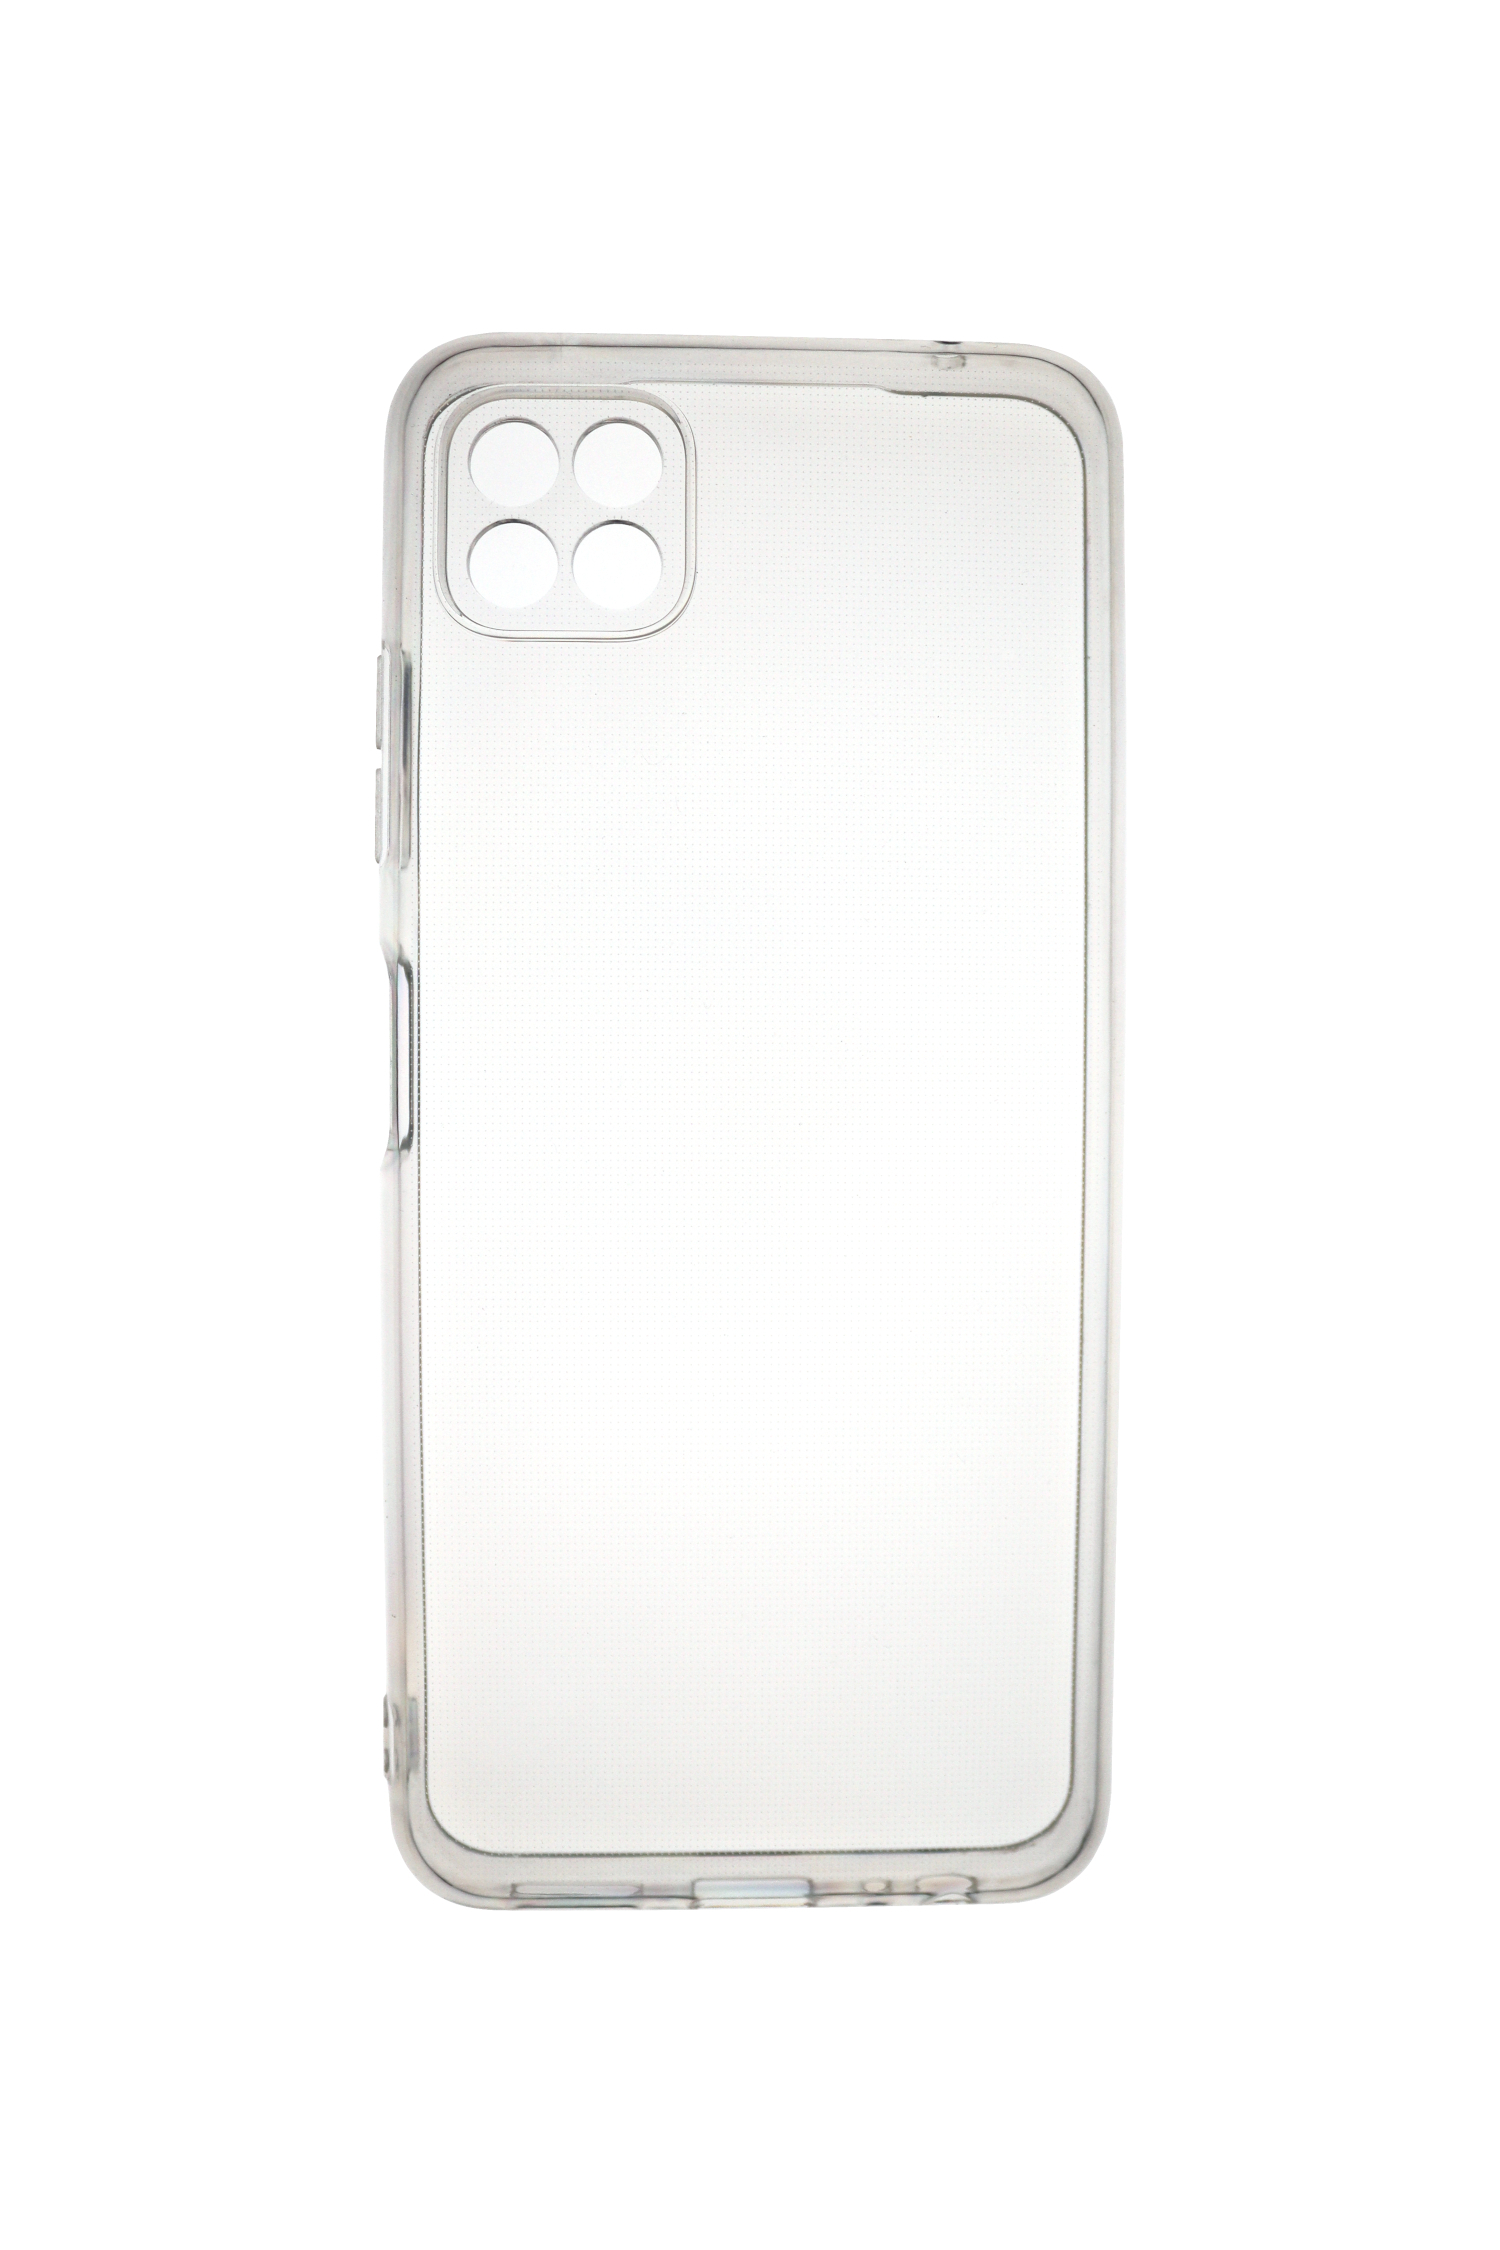 JAMCOVER 2.0 Backcover, mm A22 5G, Galaxy Samsung, Case Transparent Strong, TPU